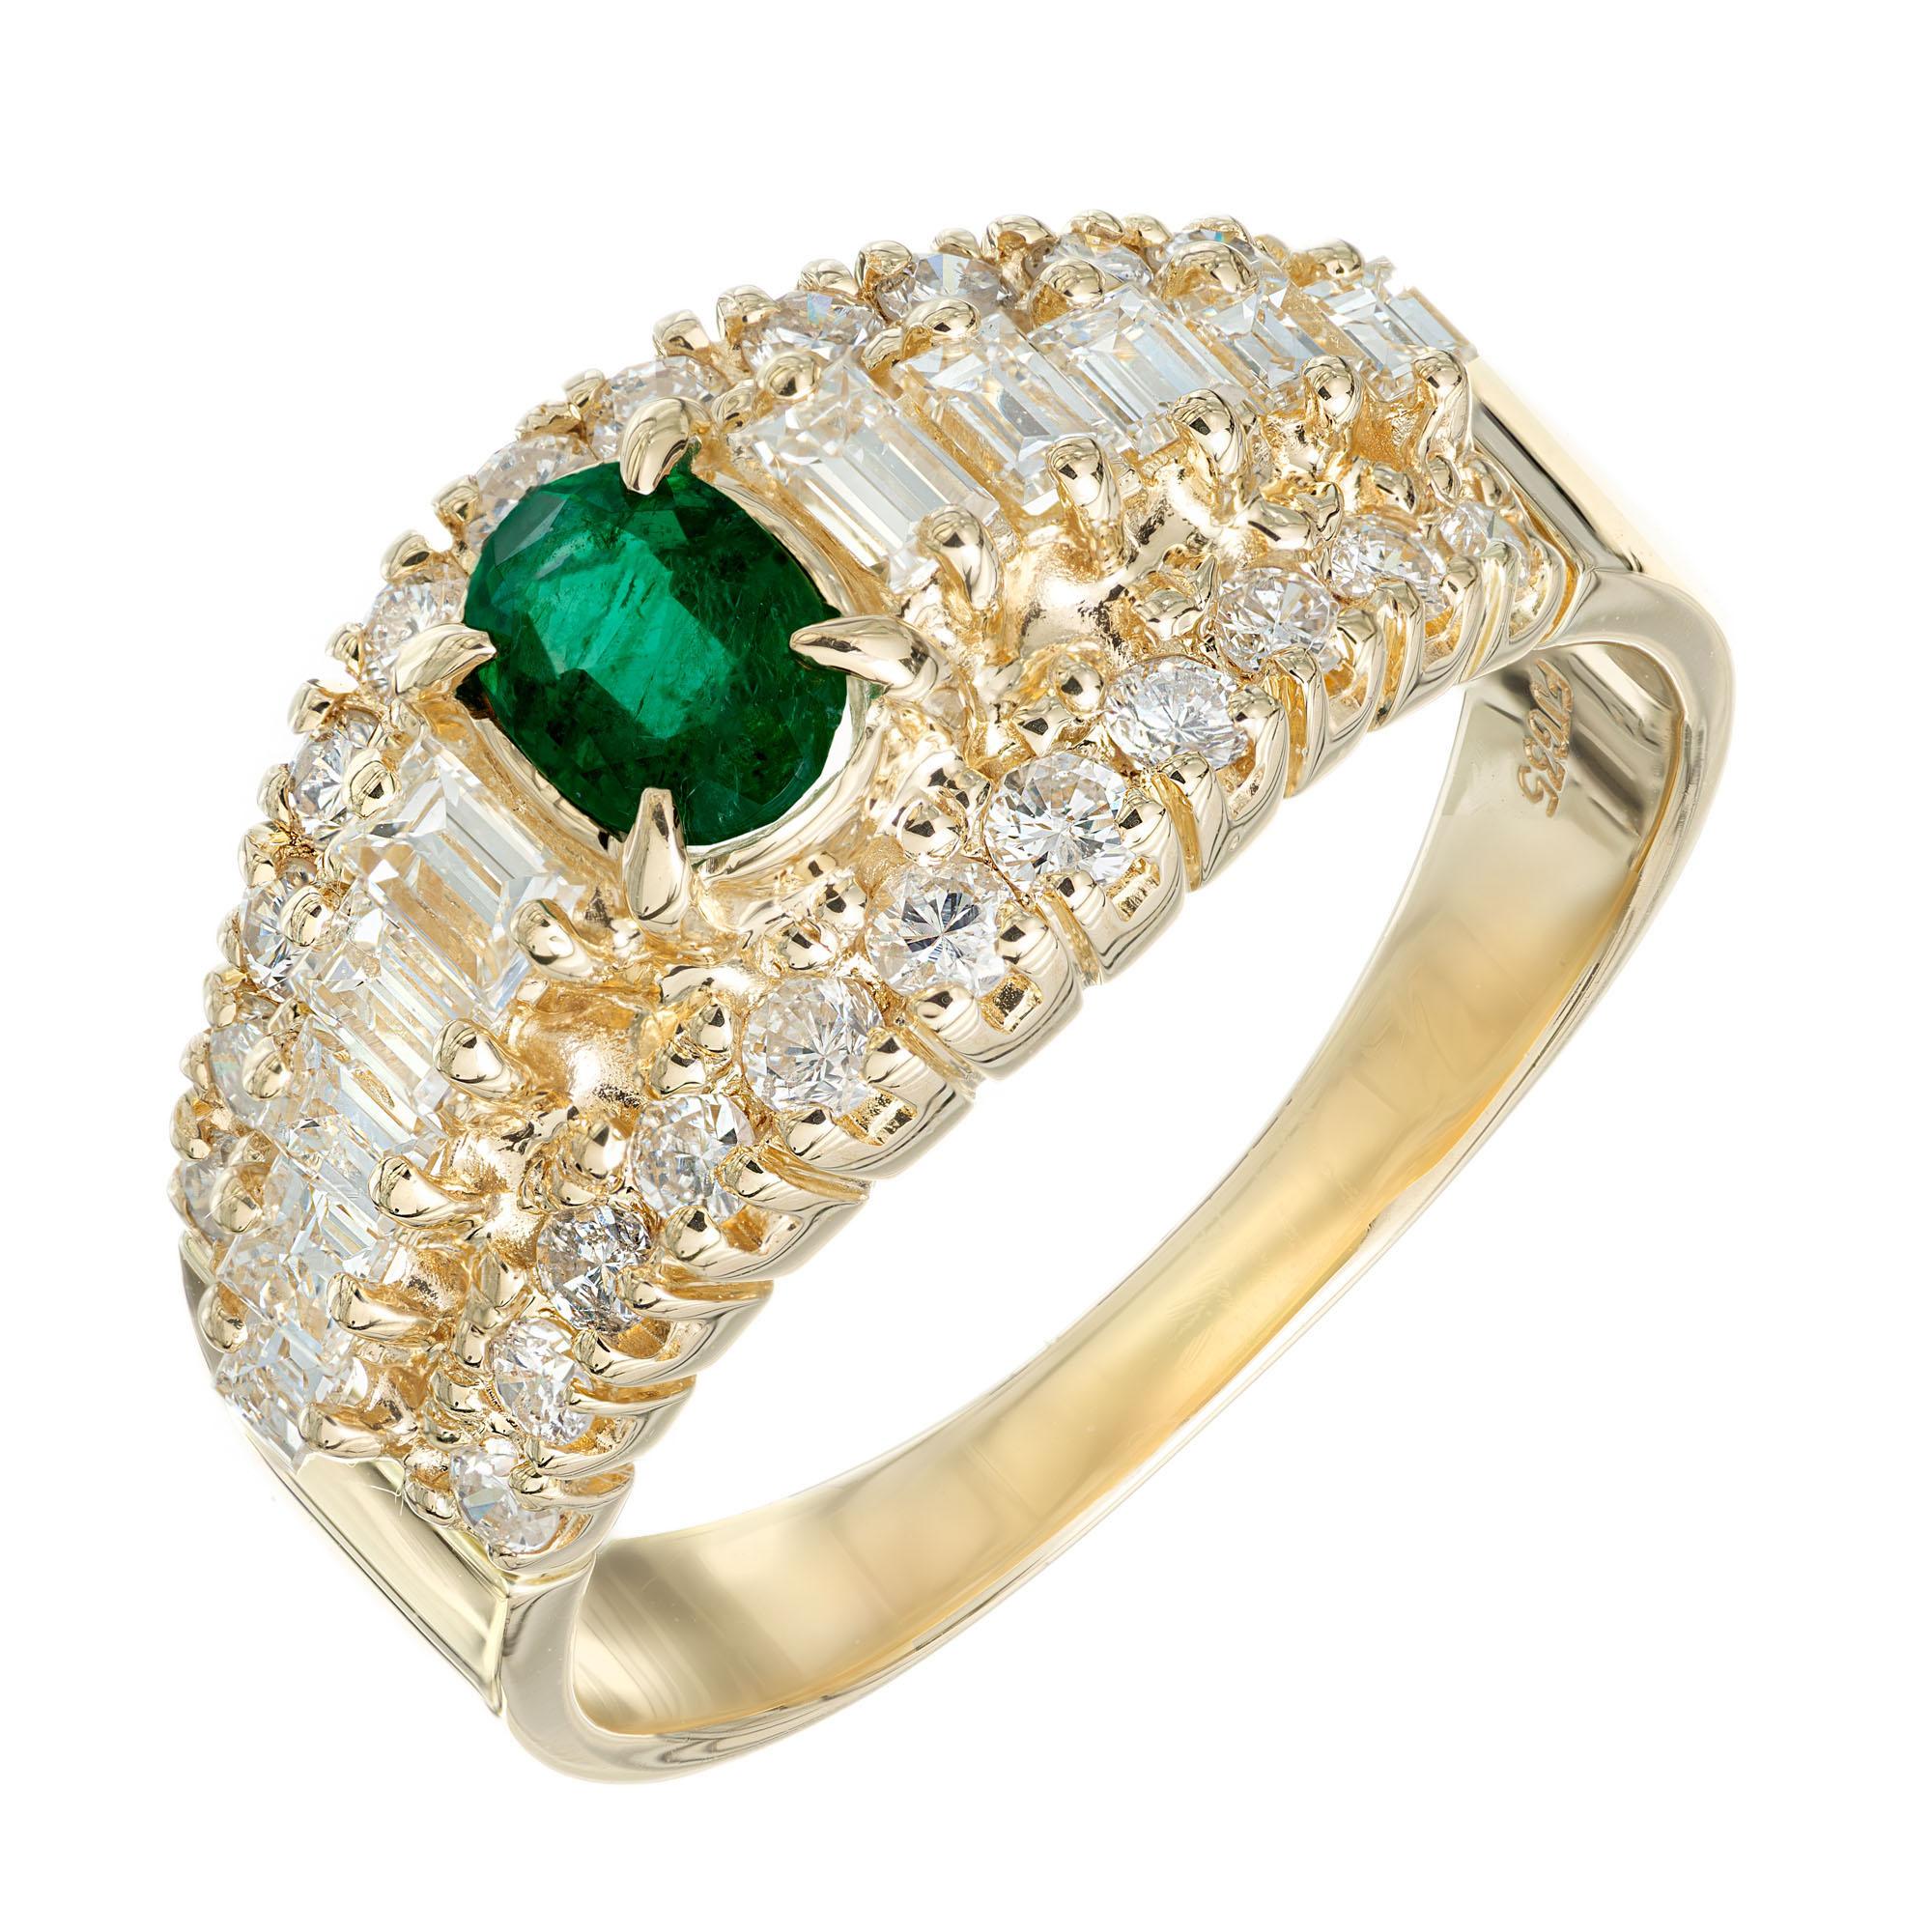 Emerald and diamond engagement ring. GIA certified oval green emerald center stone in a 14k yellow gold dome setting with 10 baguette and 22 round brilliant cut diamonds. 

1 oval green emerald, SI approx. .30cts GIA Certificate # 1216379506
10